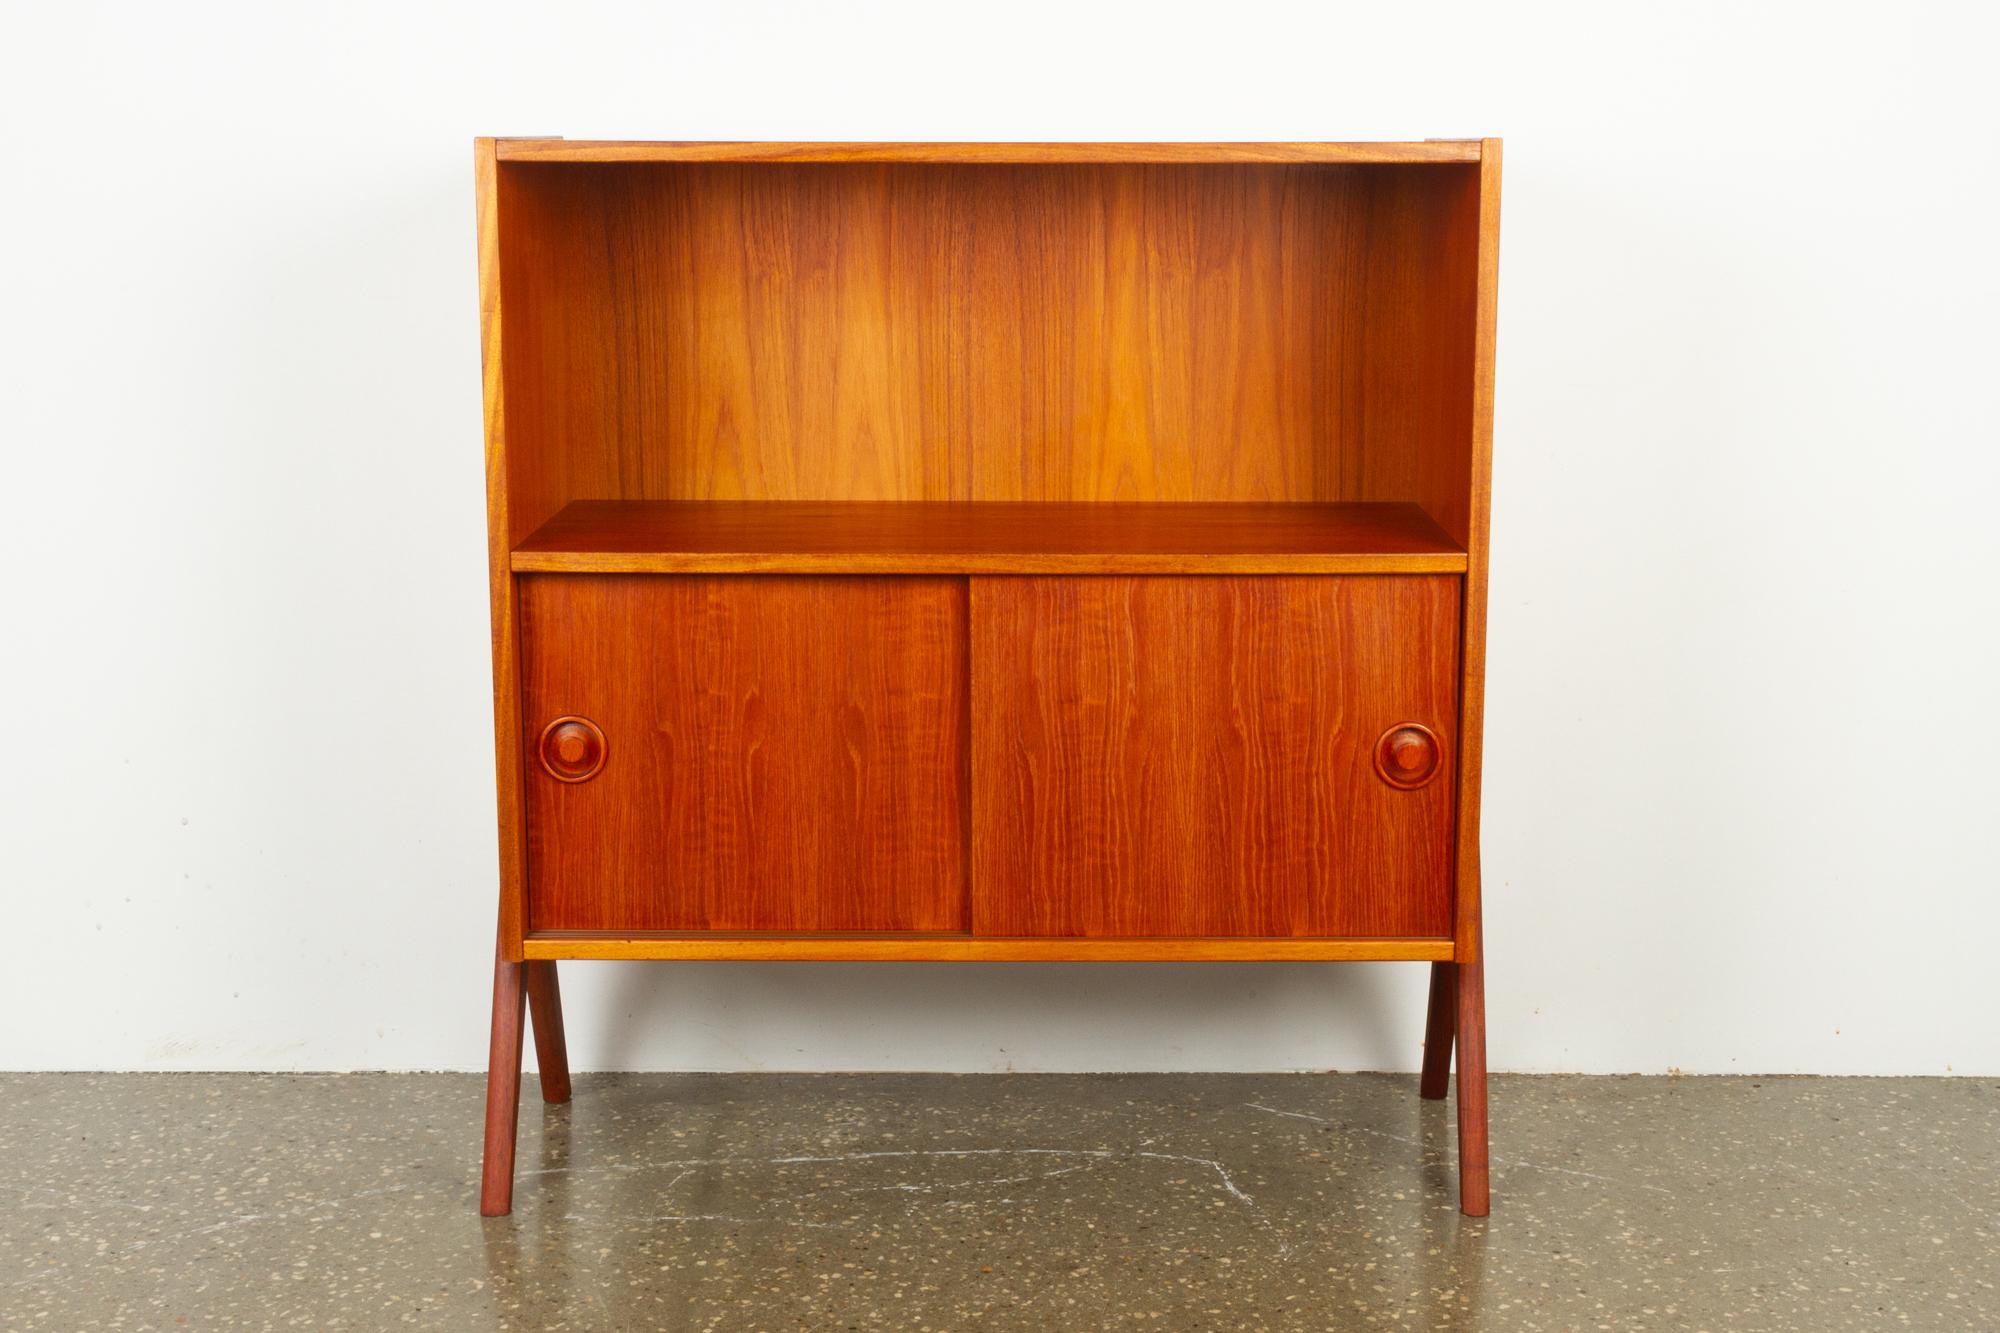 Vintage Danish teak cabinet, 1960s
Light and small elegant cabinet / bookcase in beautiful teak with a warm and golden hue. Top half with a wide open compartment, lower half with double sliding doors. Inside is a single shelf. Doors has round grips